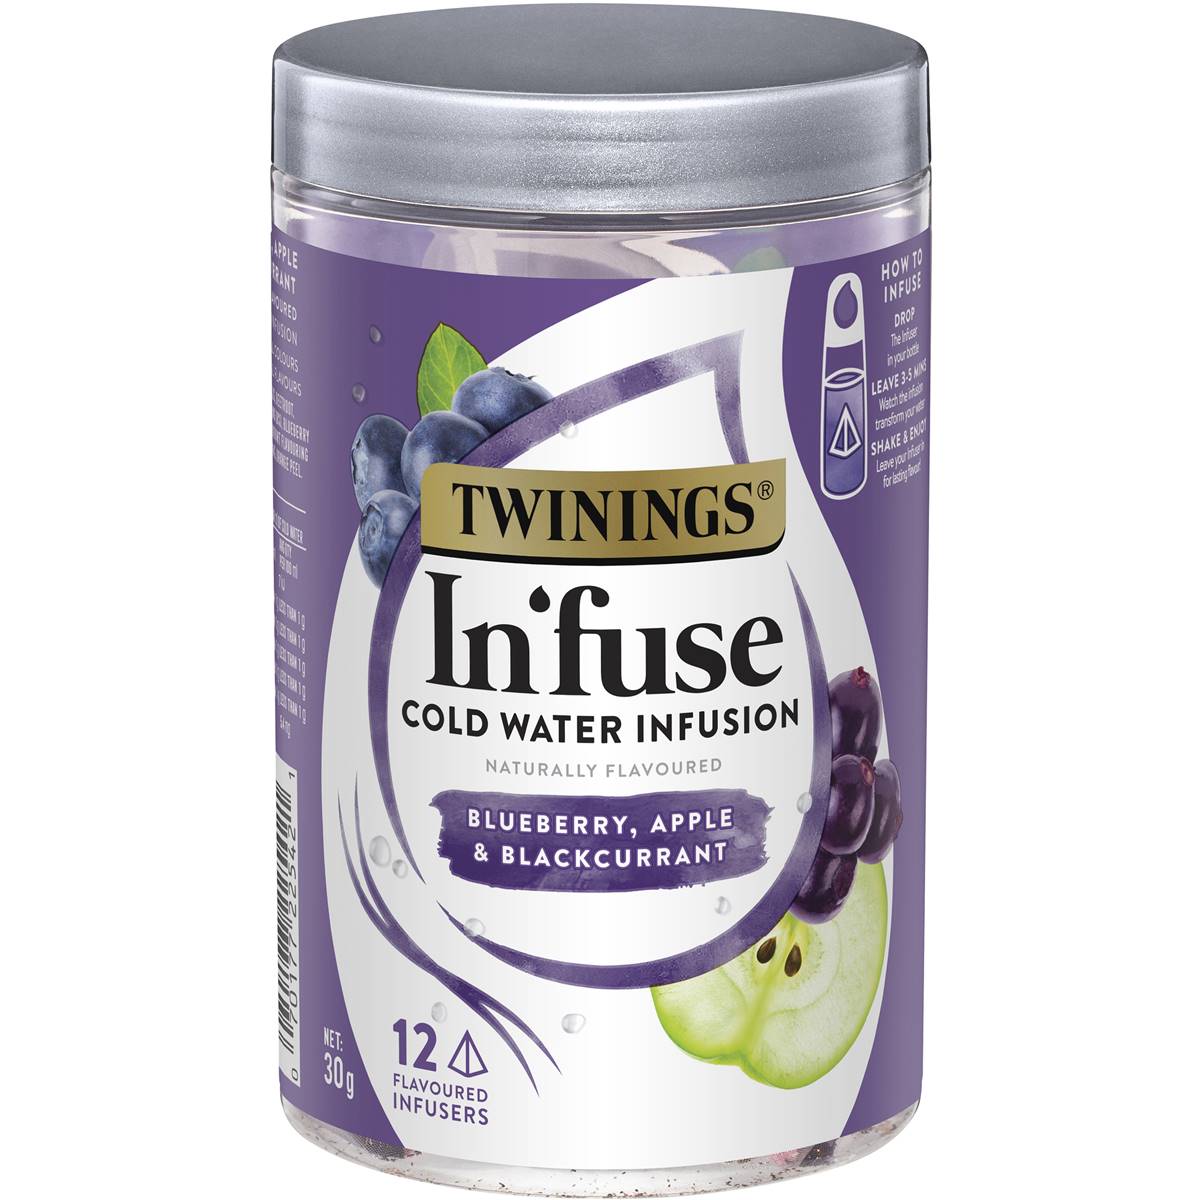 Calories in Twinings In'fuse Blueberry,blackcurrant & Apple Cold Water Infusion